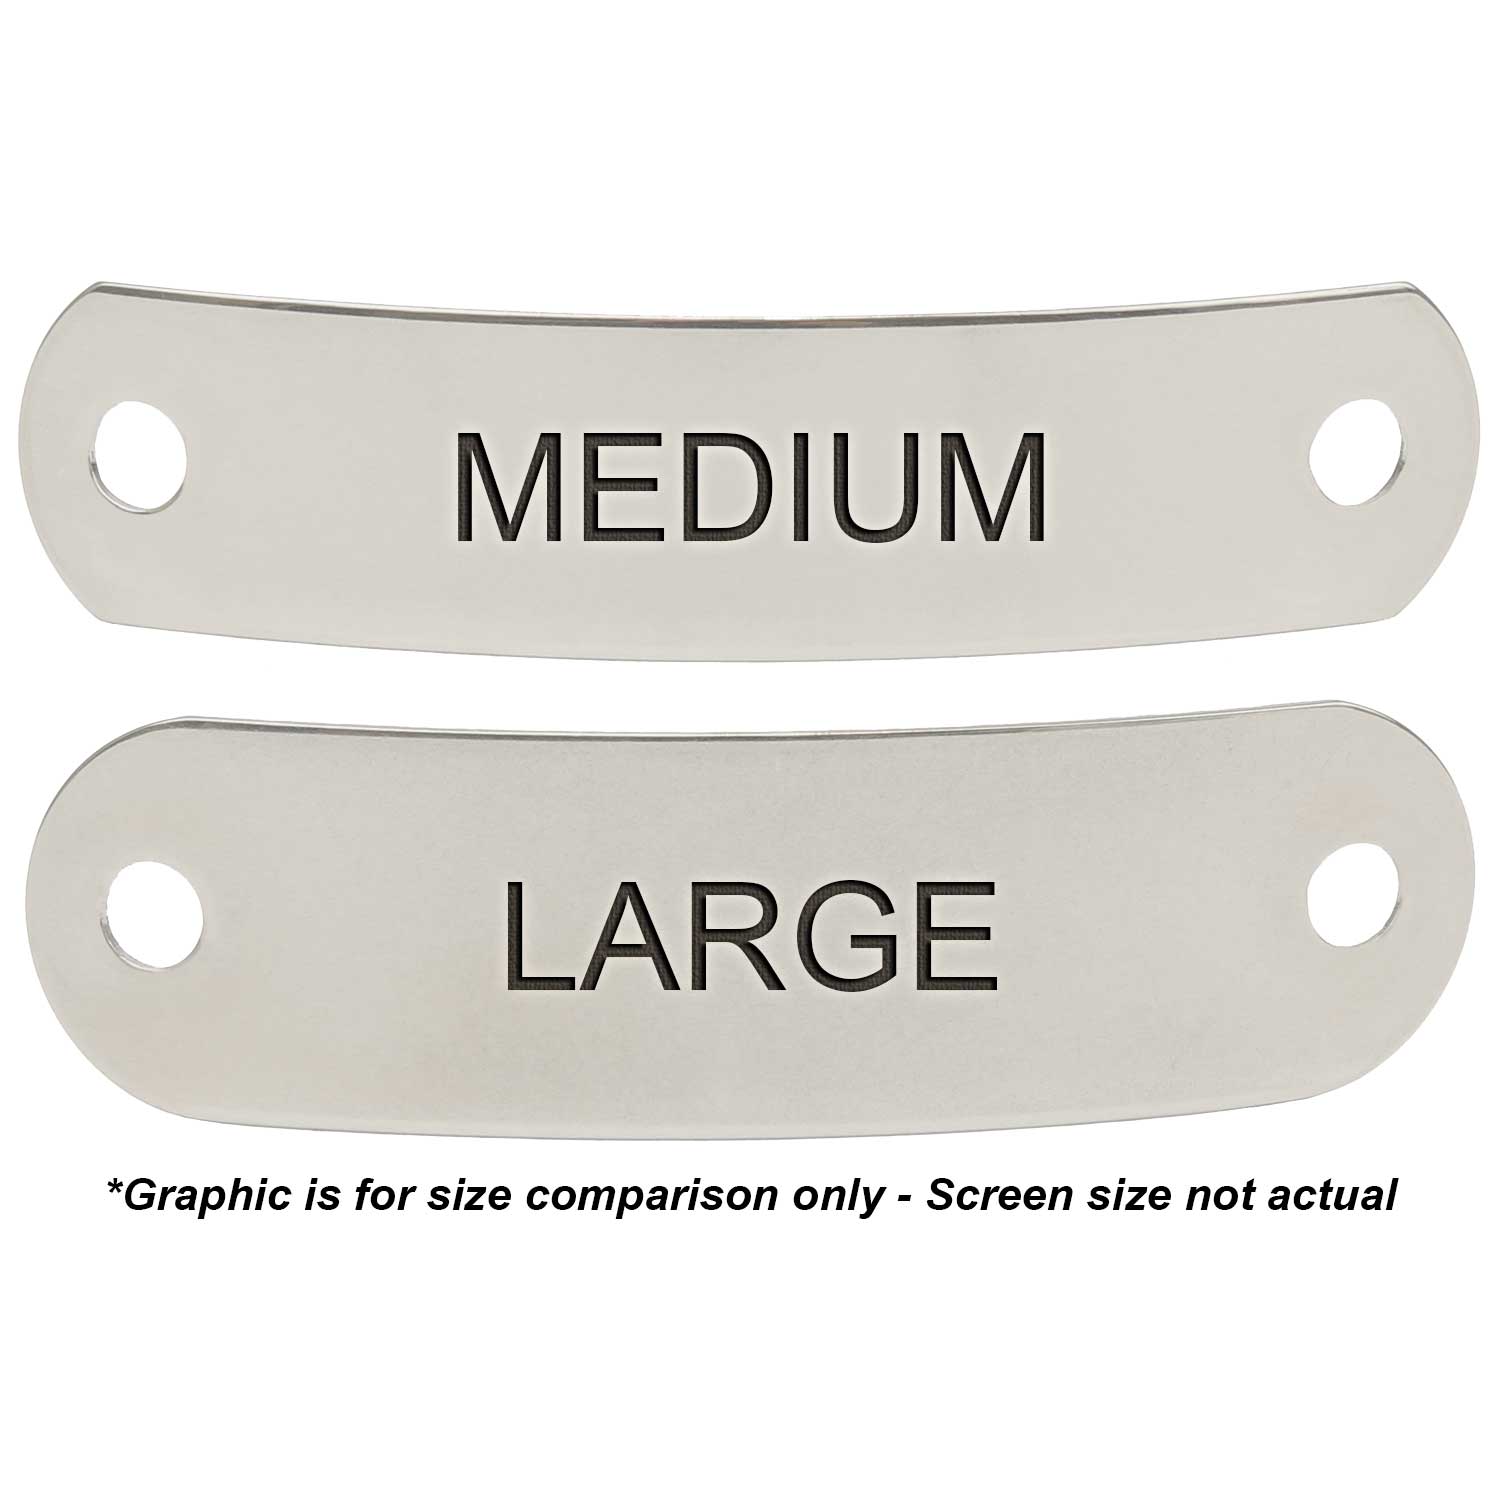 Medium and Large Name Plate Sizes Comparison